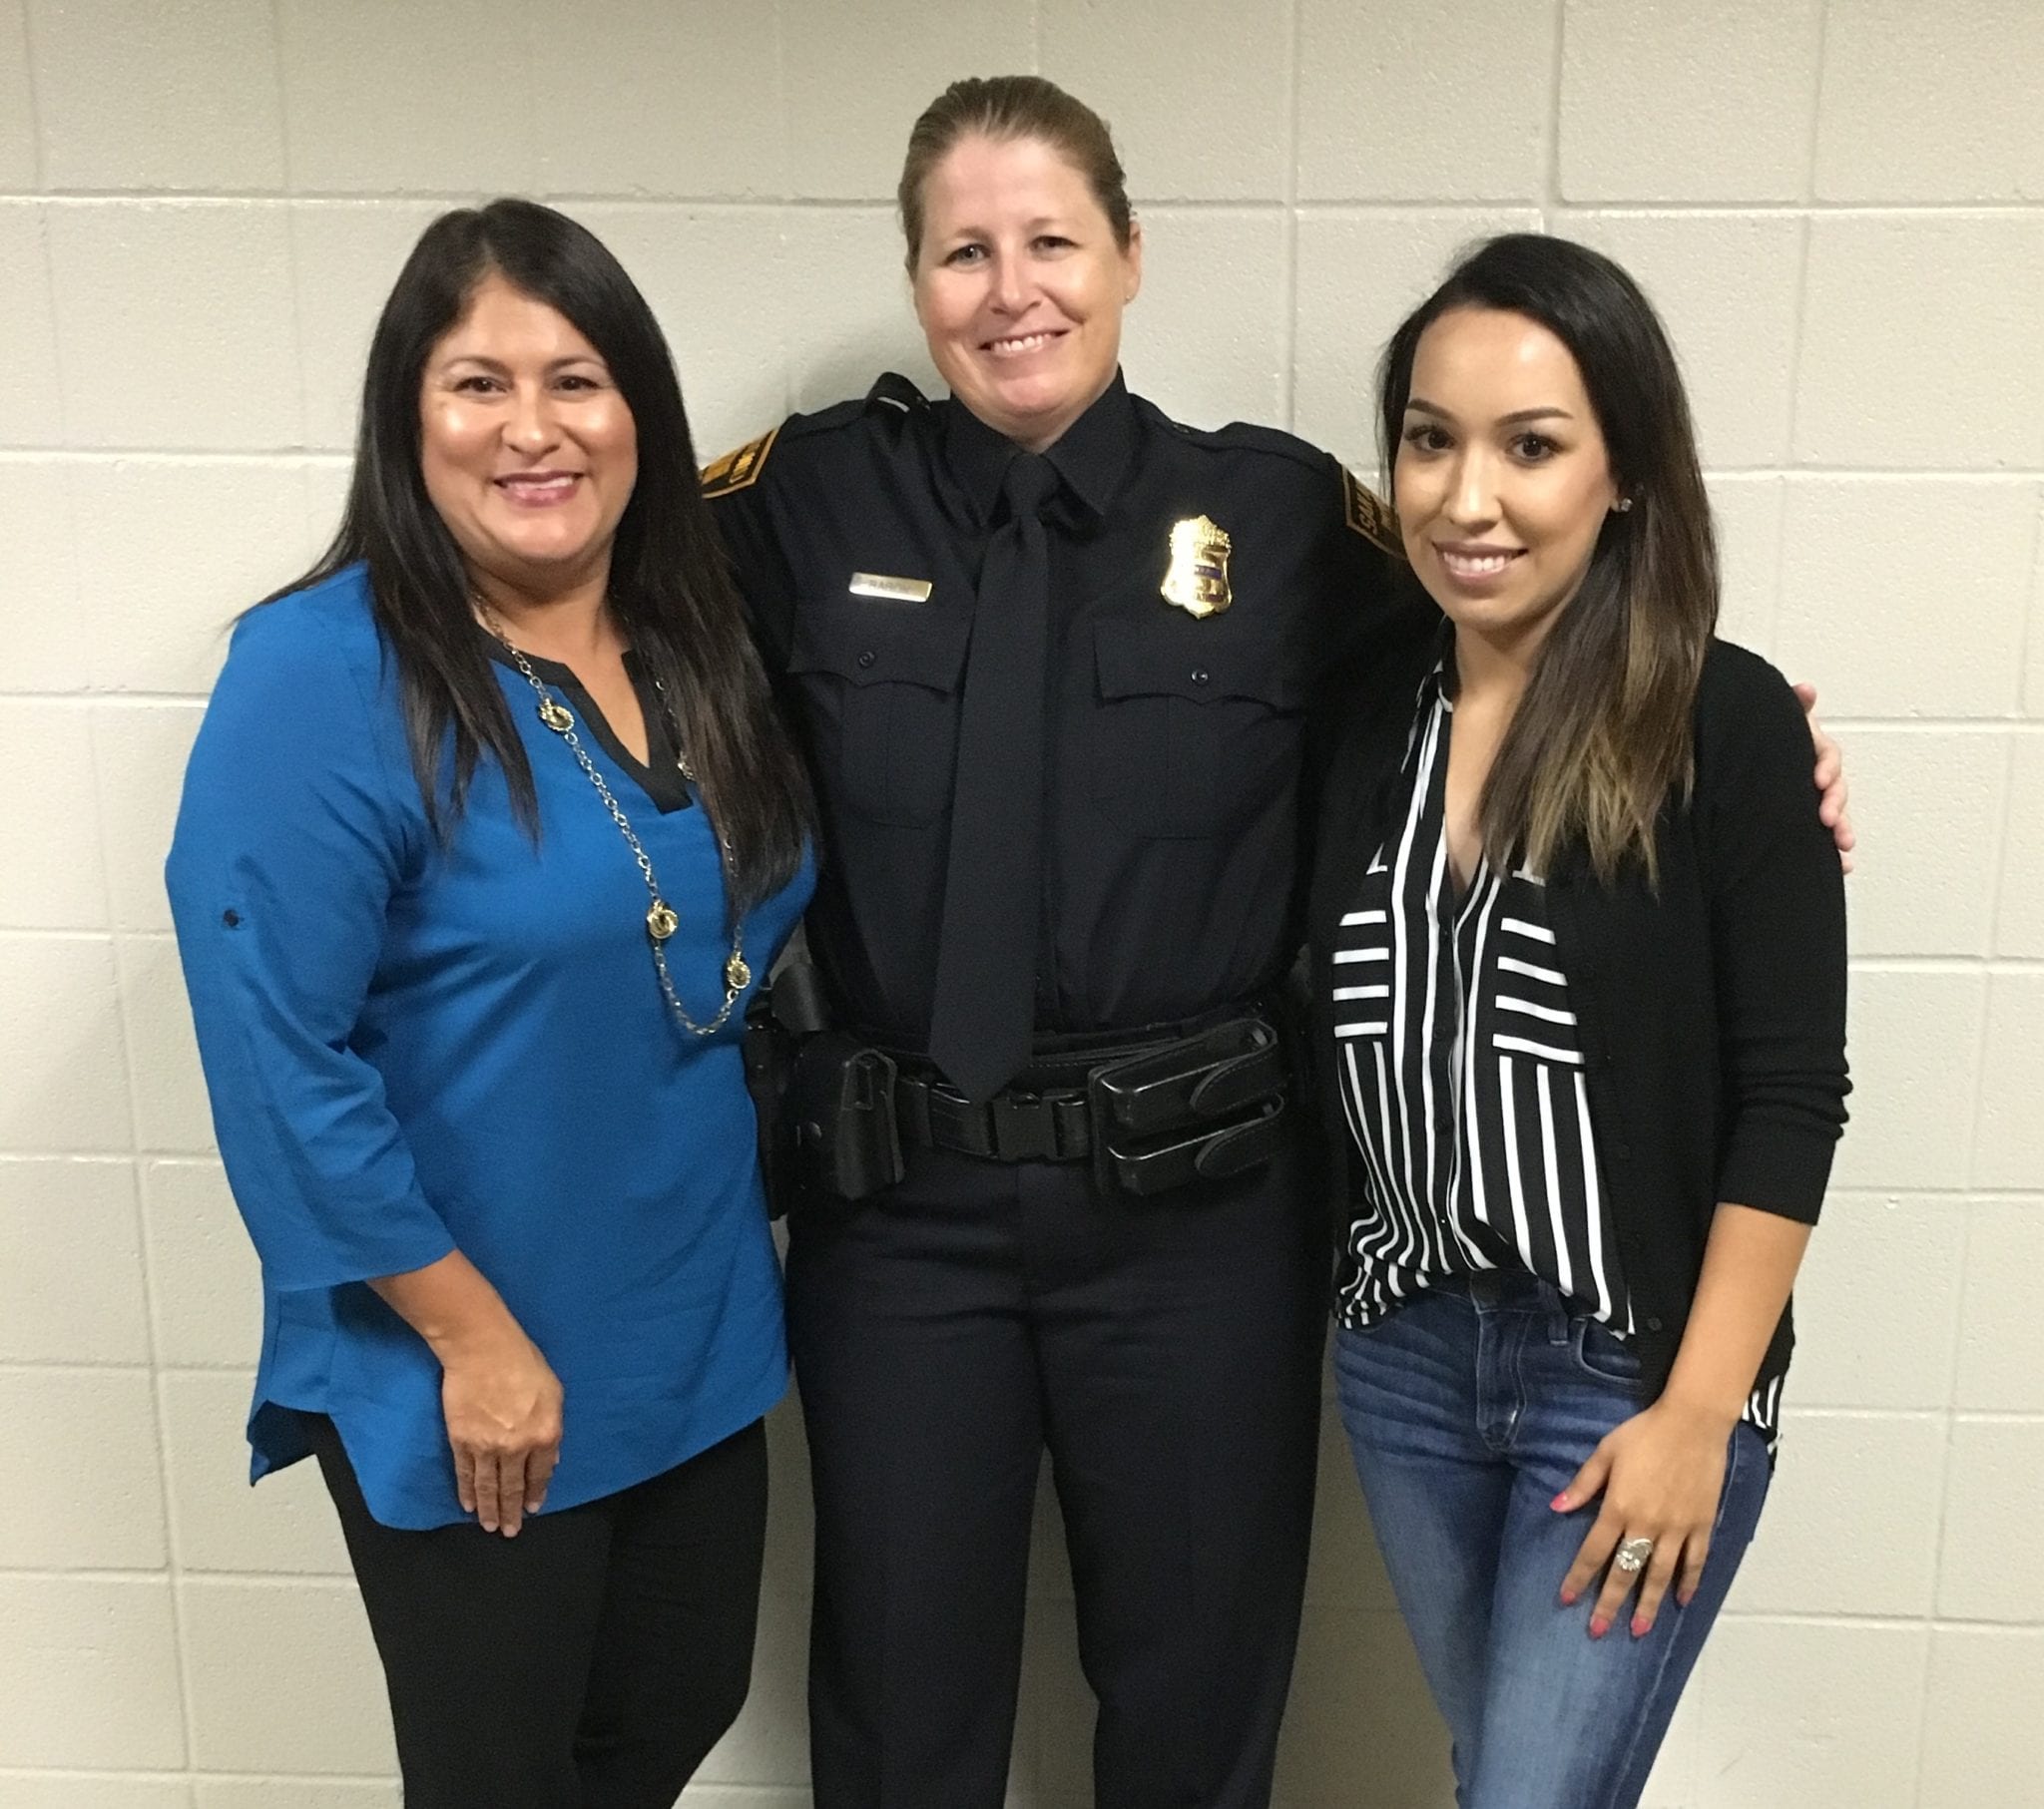 Pictured: SAPD Sgt. Tina Baron with Blue Cares Director of Community Outreach & Fundraising, Adriana Valadez, and Assistant Director of Community Outreach & Fundraising, Sofia Riojas, at Baron's promotion ceremony.